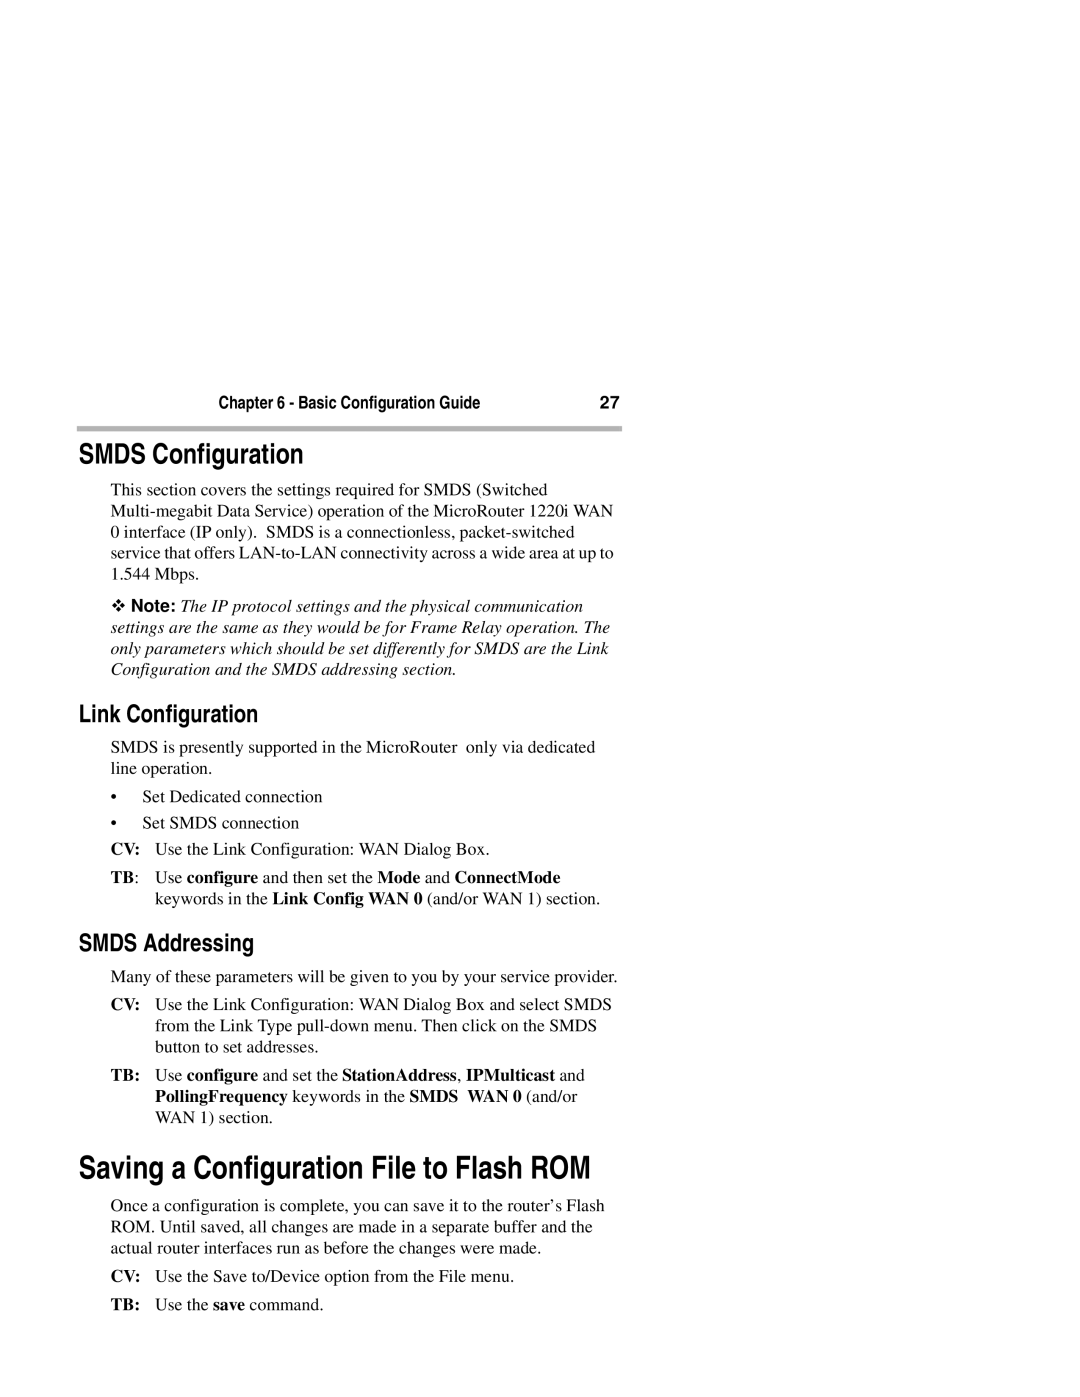 Compatible Systems 1220I manual Saving a Configuration File to Flash ROM, Smds Addressing 